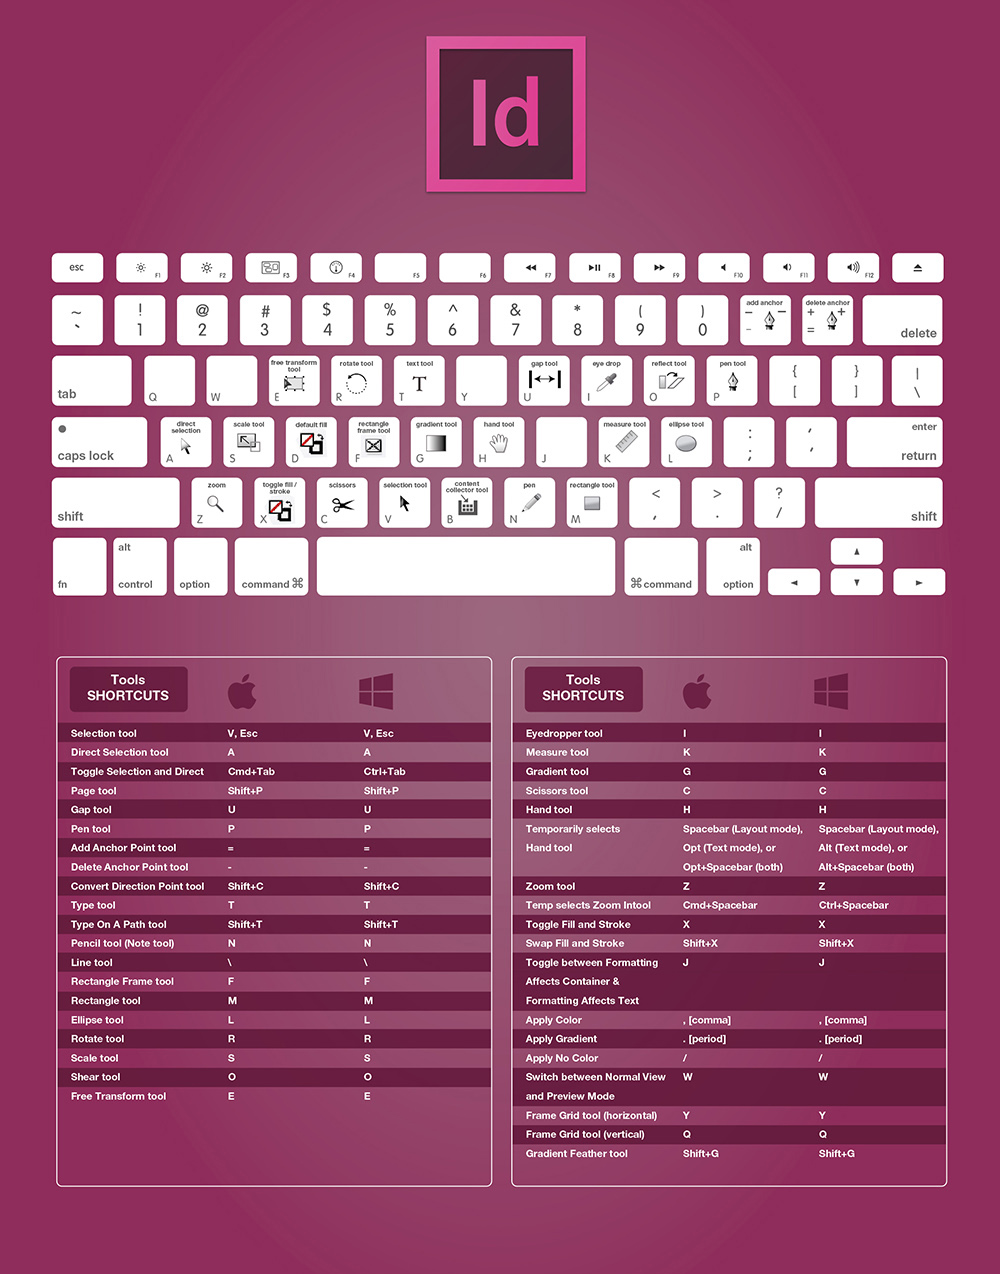 The Complete Adobe Indesign CC Keyboard Shortcuts For Designers Guide 2015